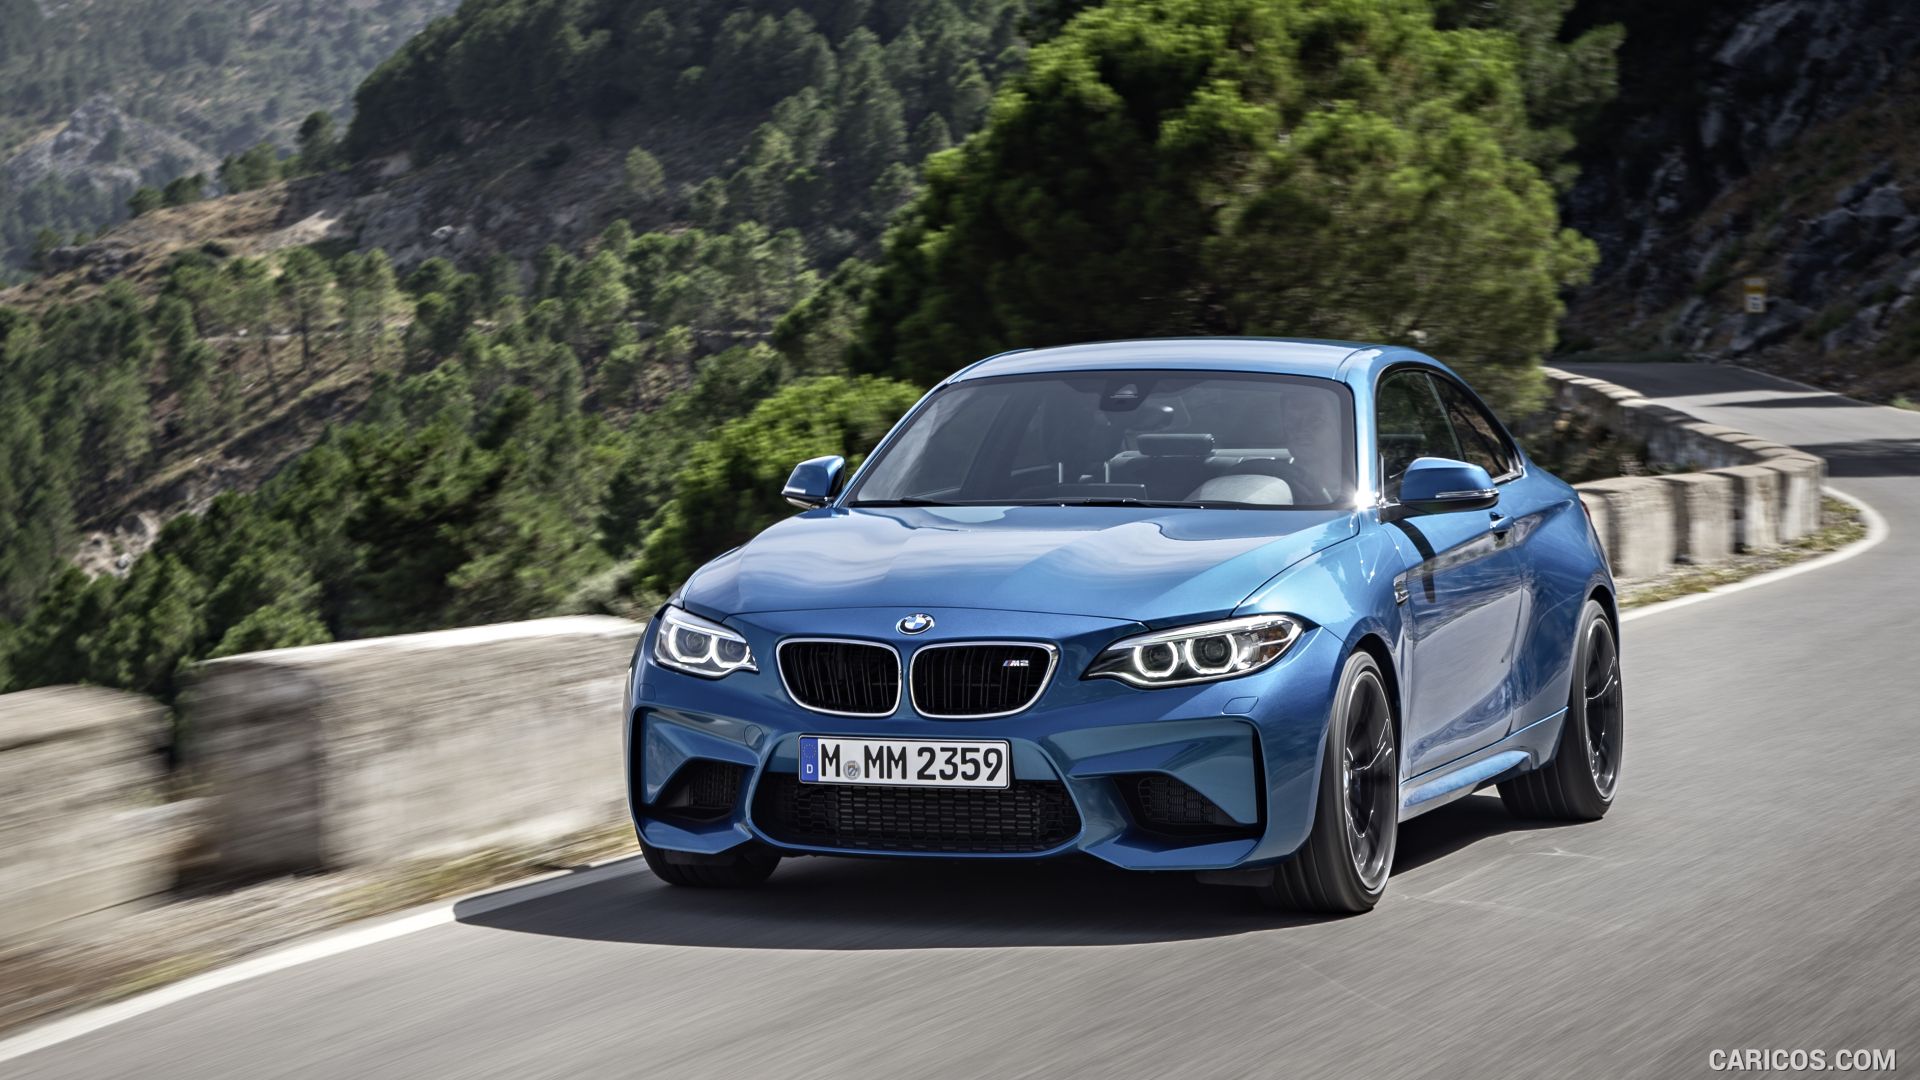 Beautiful BMW M2 Wallpaper Full HD Pictures